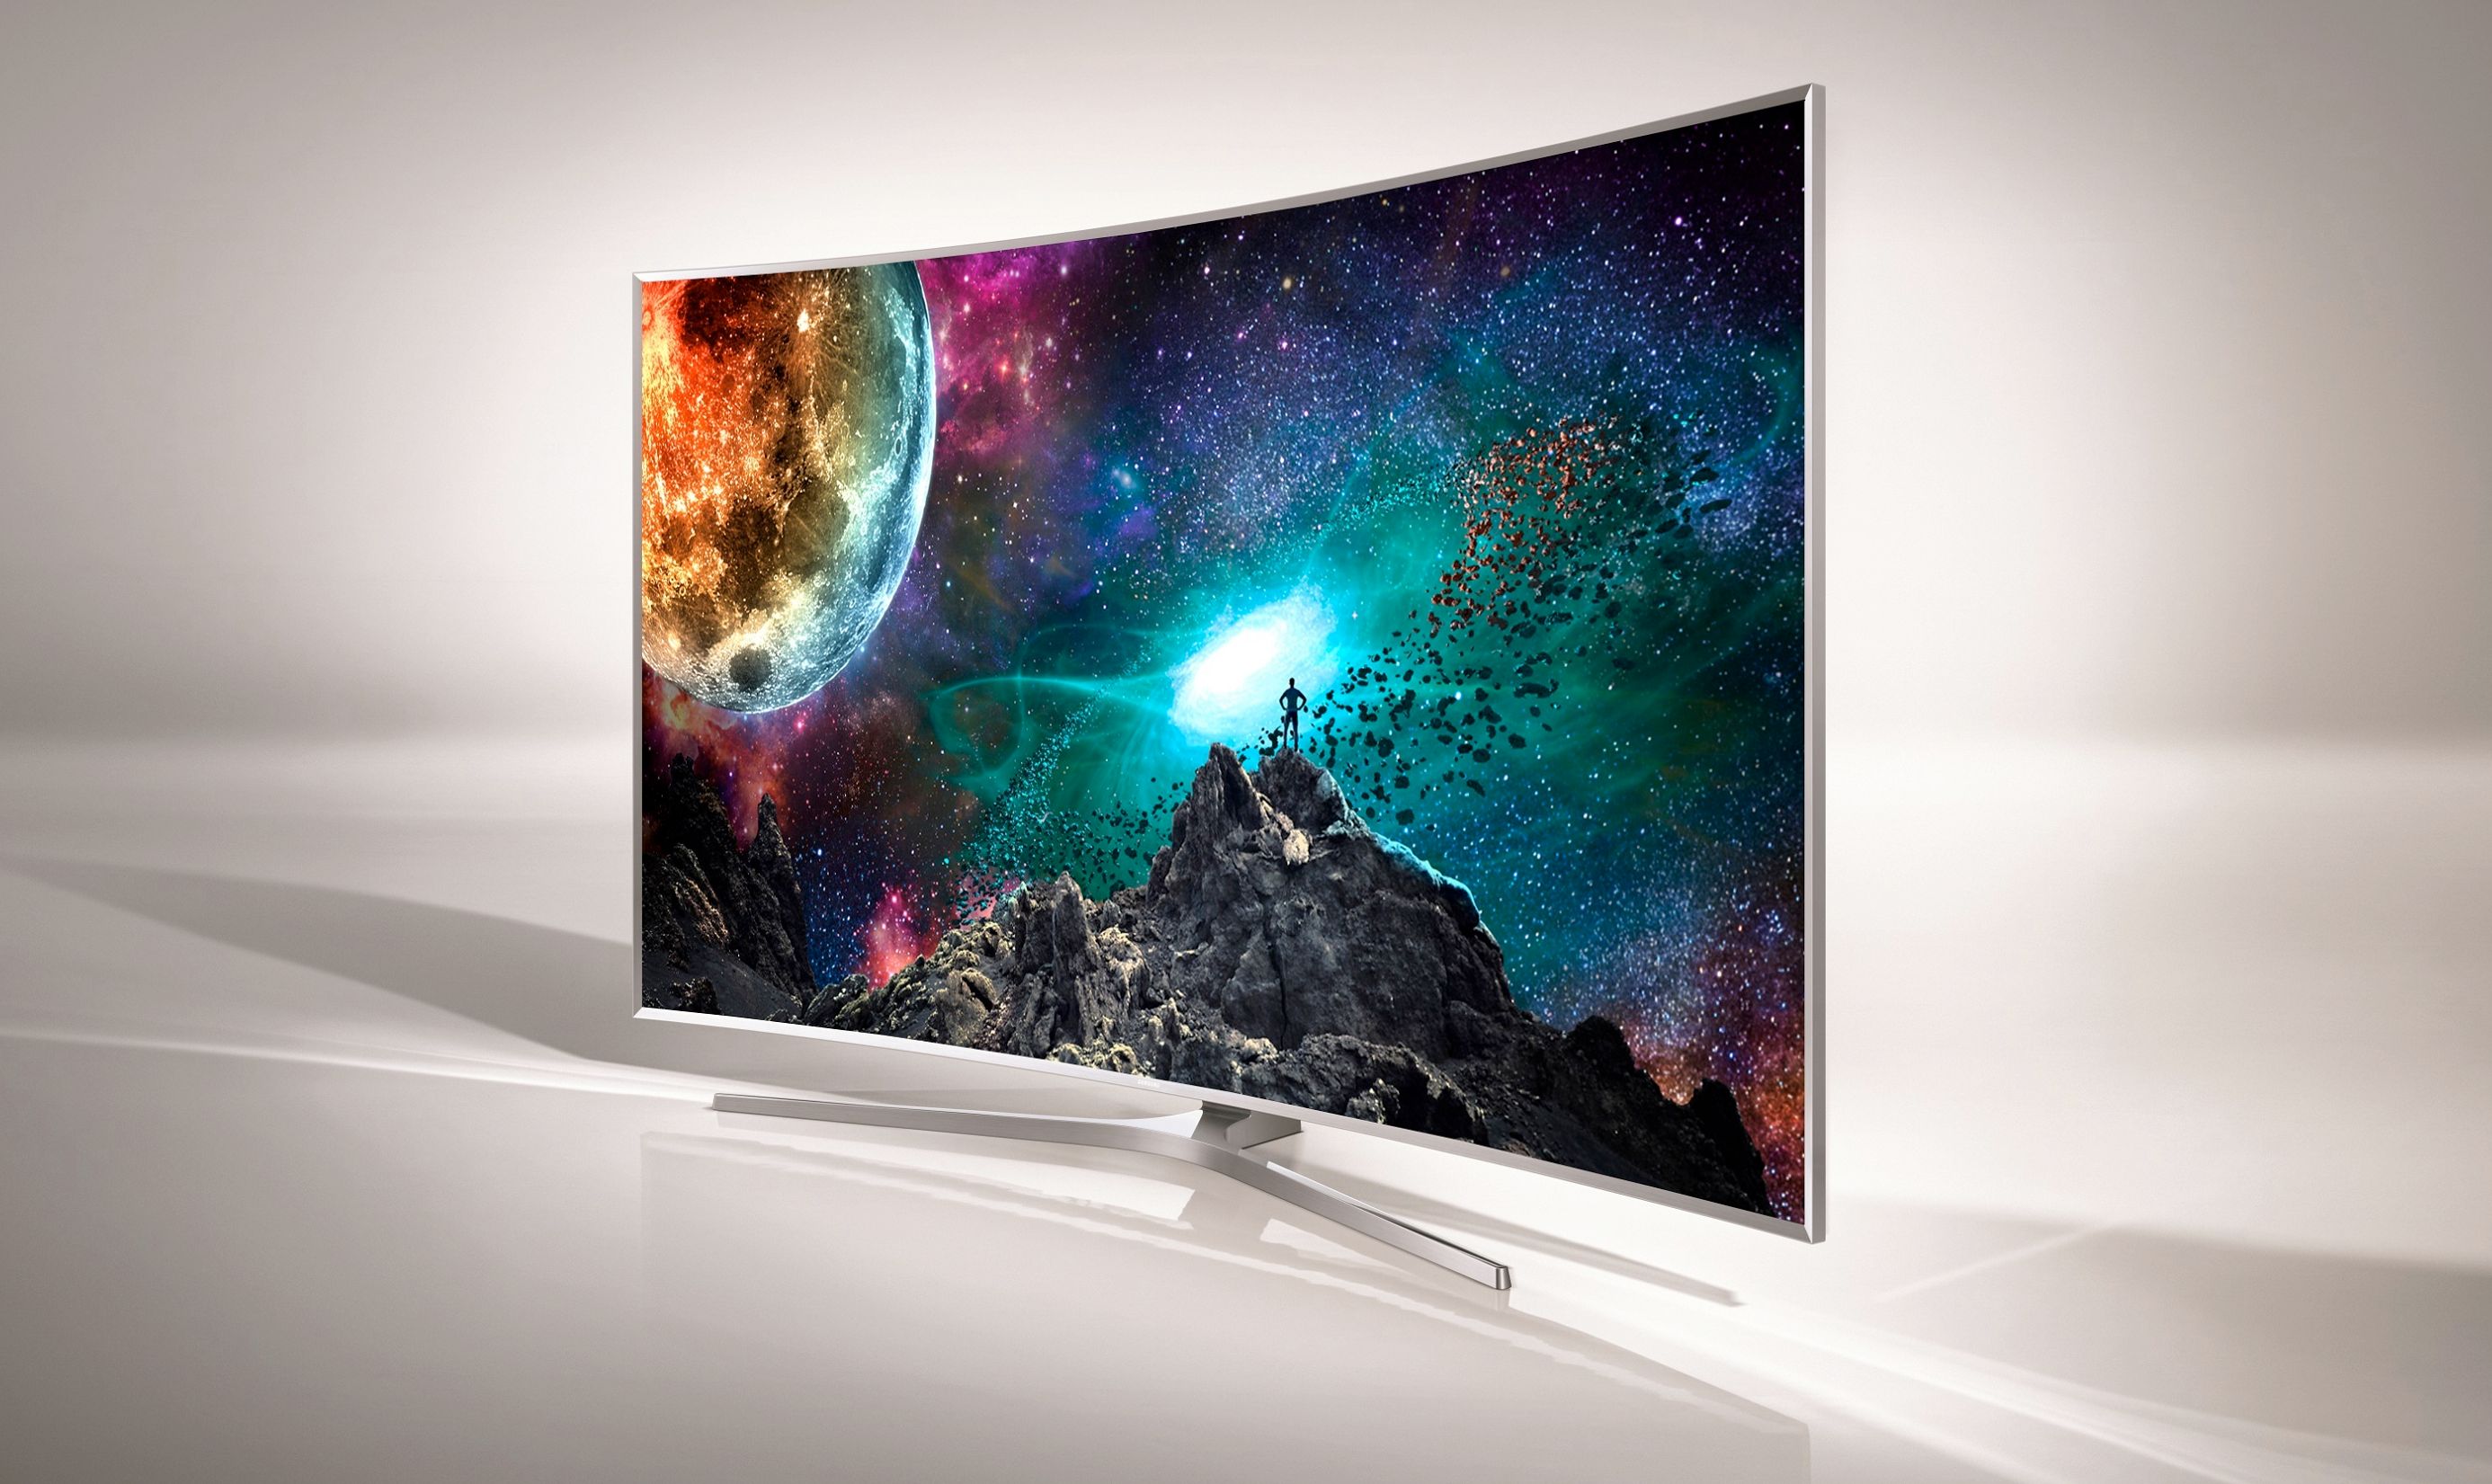 samsung suhd tvs 4k resolution meets quantum dot tech for affordable ultra high definition in 2015 image 1